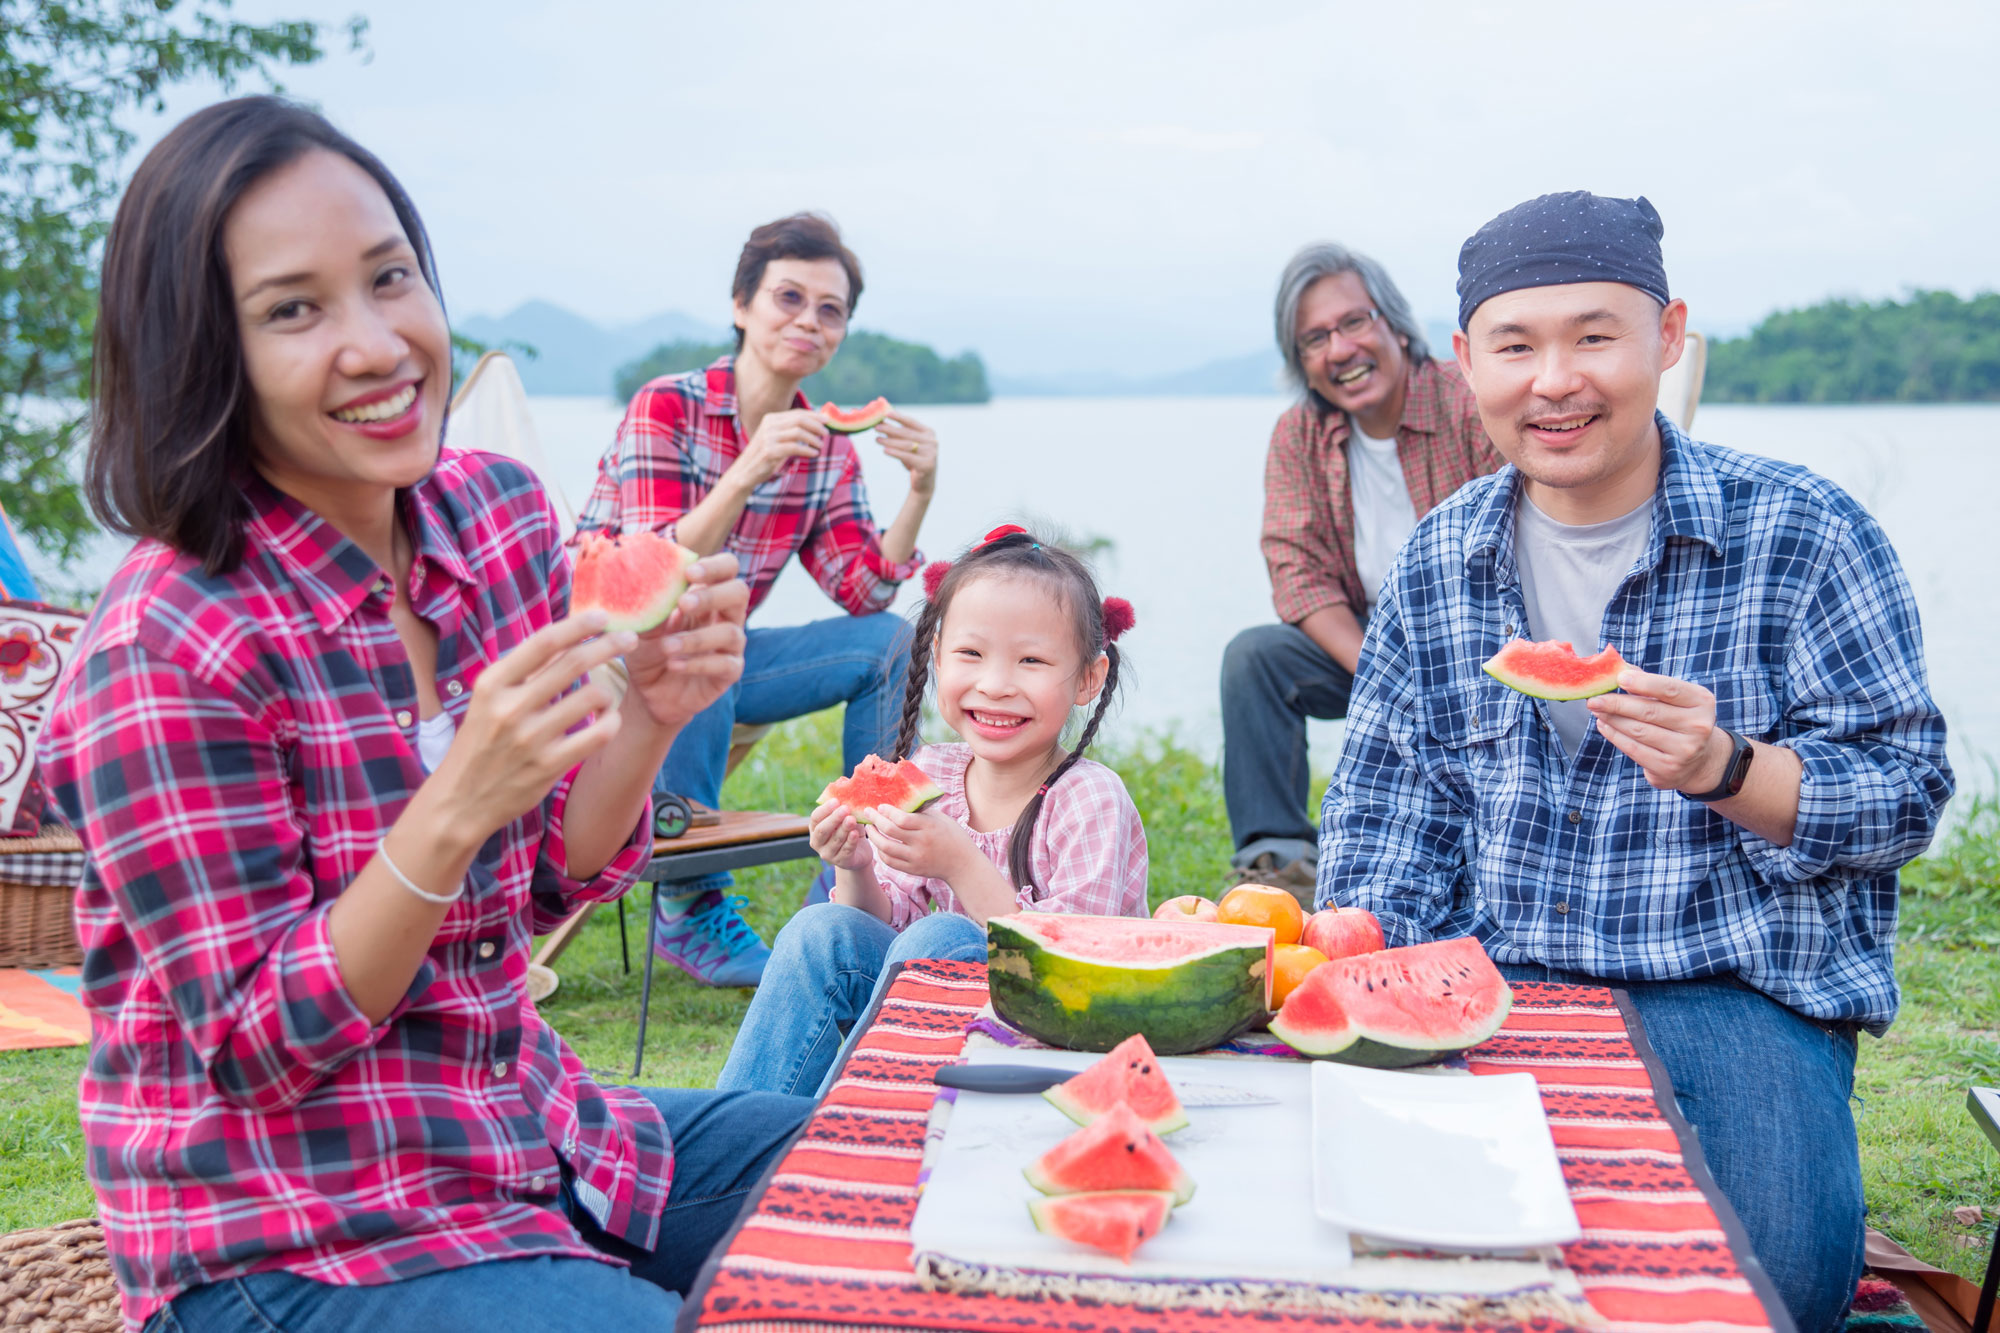 A family eating watermelon outside at a camping site near a lake. A mother, father, and their young daughter are sitting at a table, with two grandparents sitting closer to the lake in the background